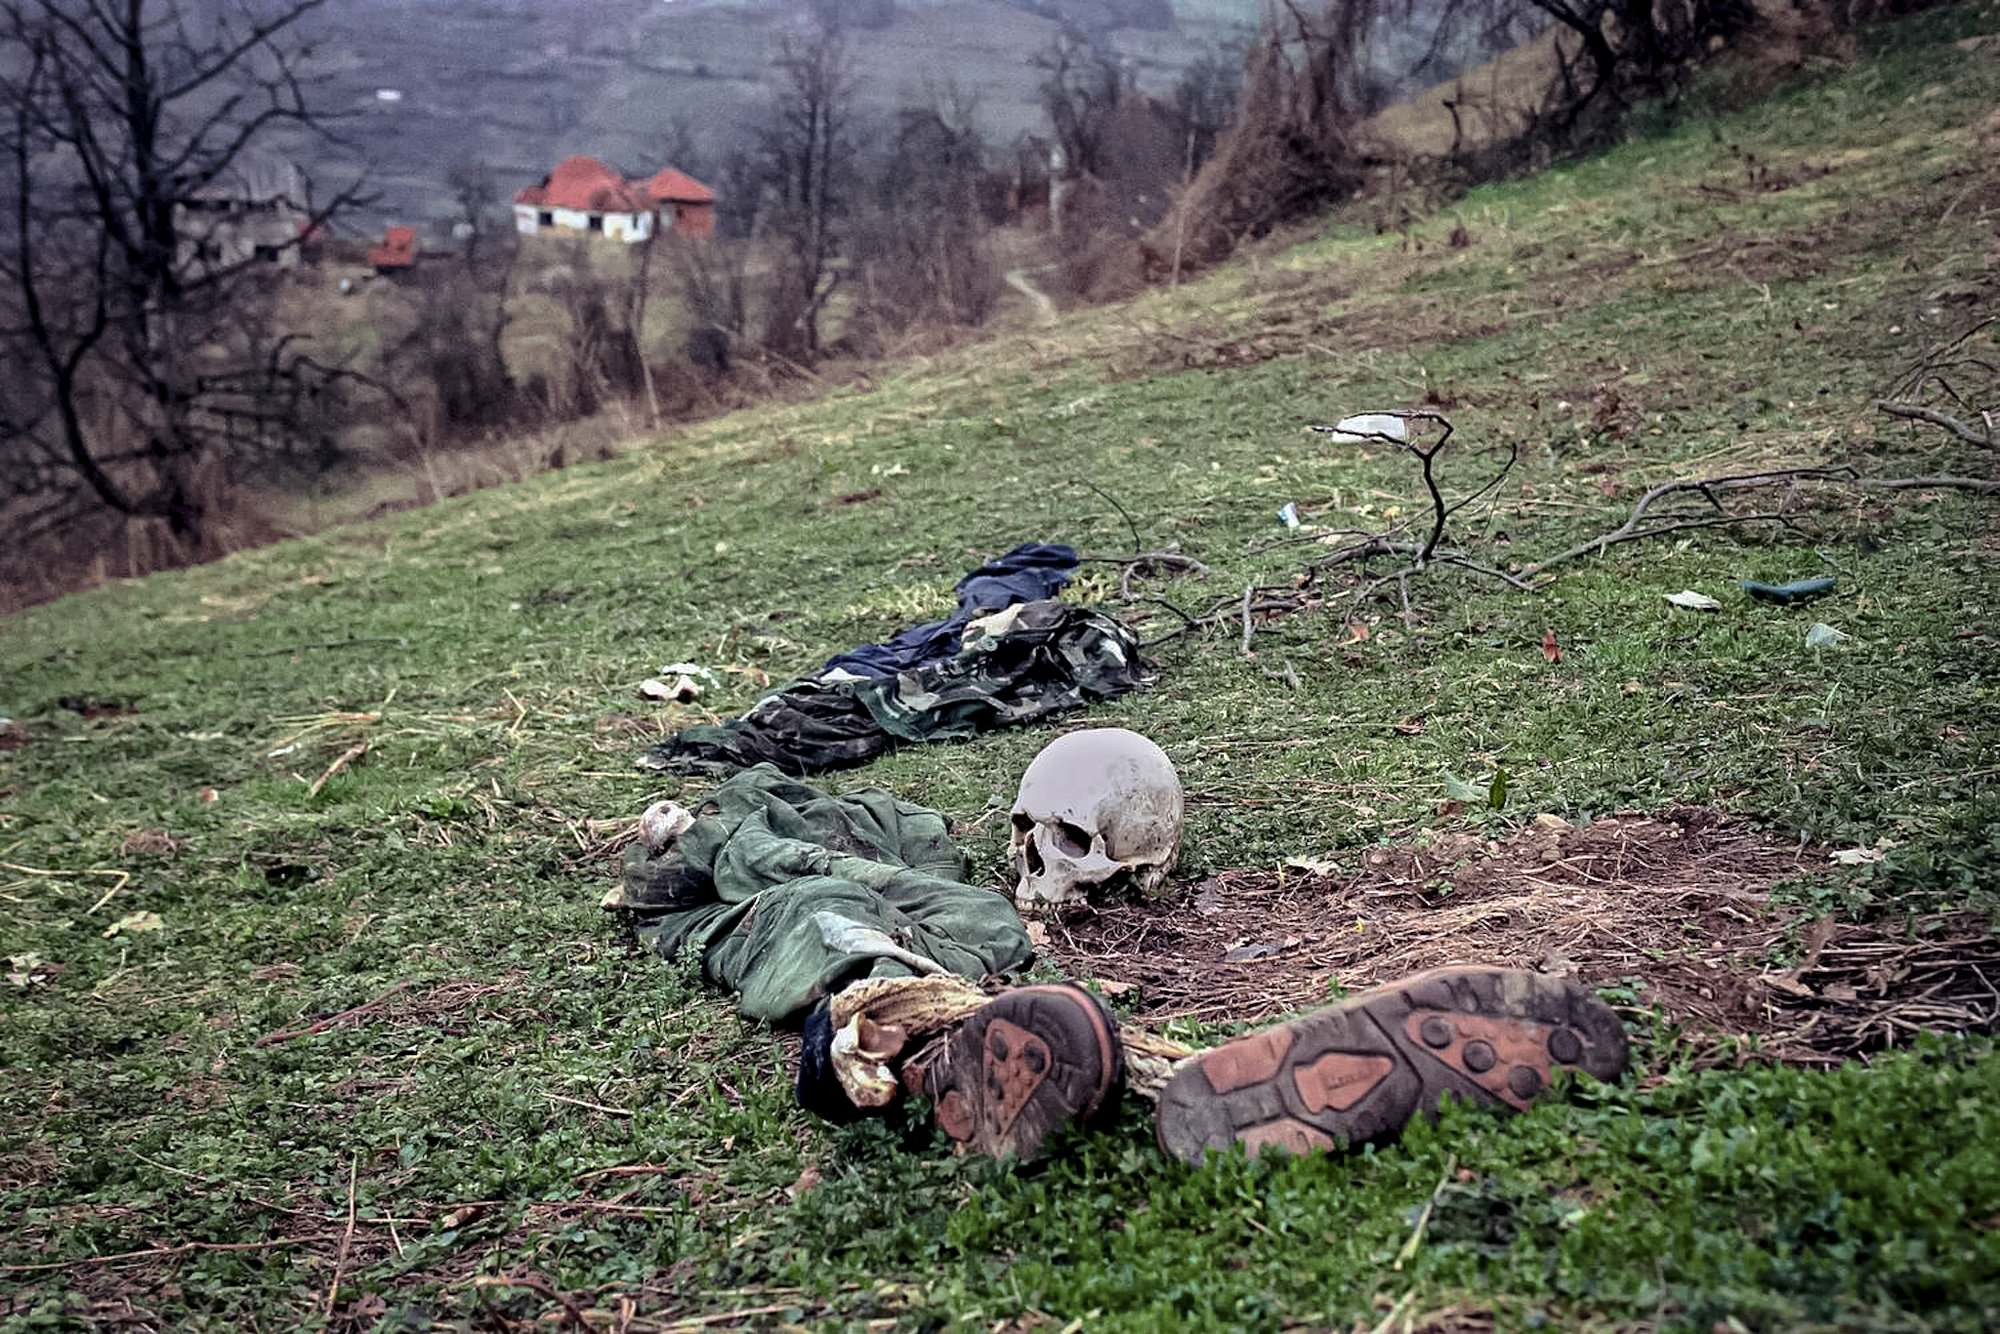 The remains of two bodies and pieces of clothing lie in a field at a suspected mass grave site in the village of Konjevic Polje, approximately 20km (12 miles), north west of Srebrenica, April 2, 1996.